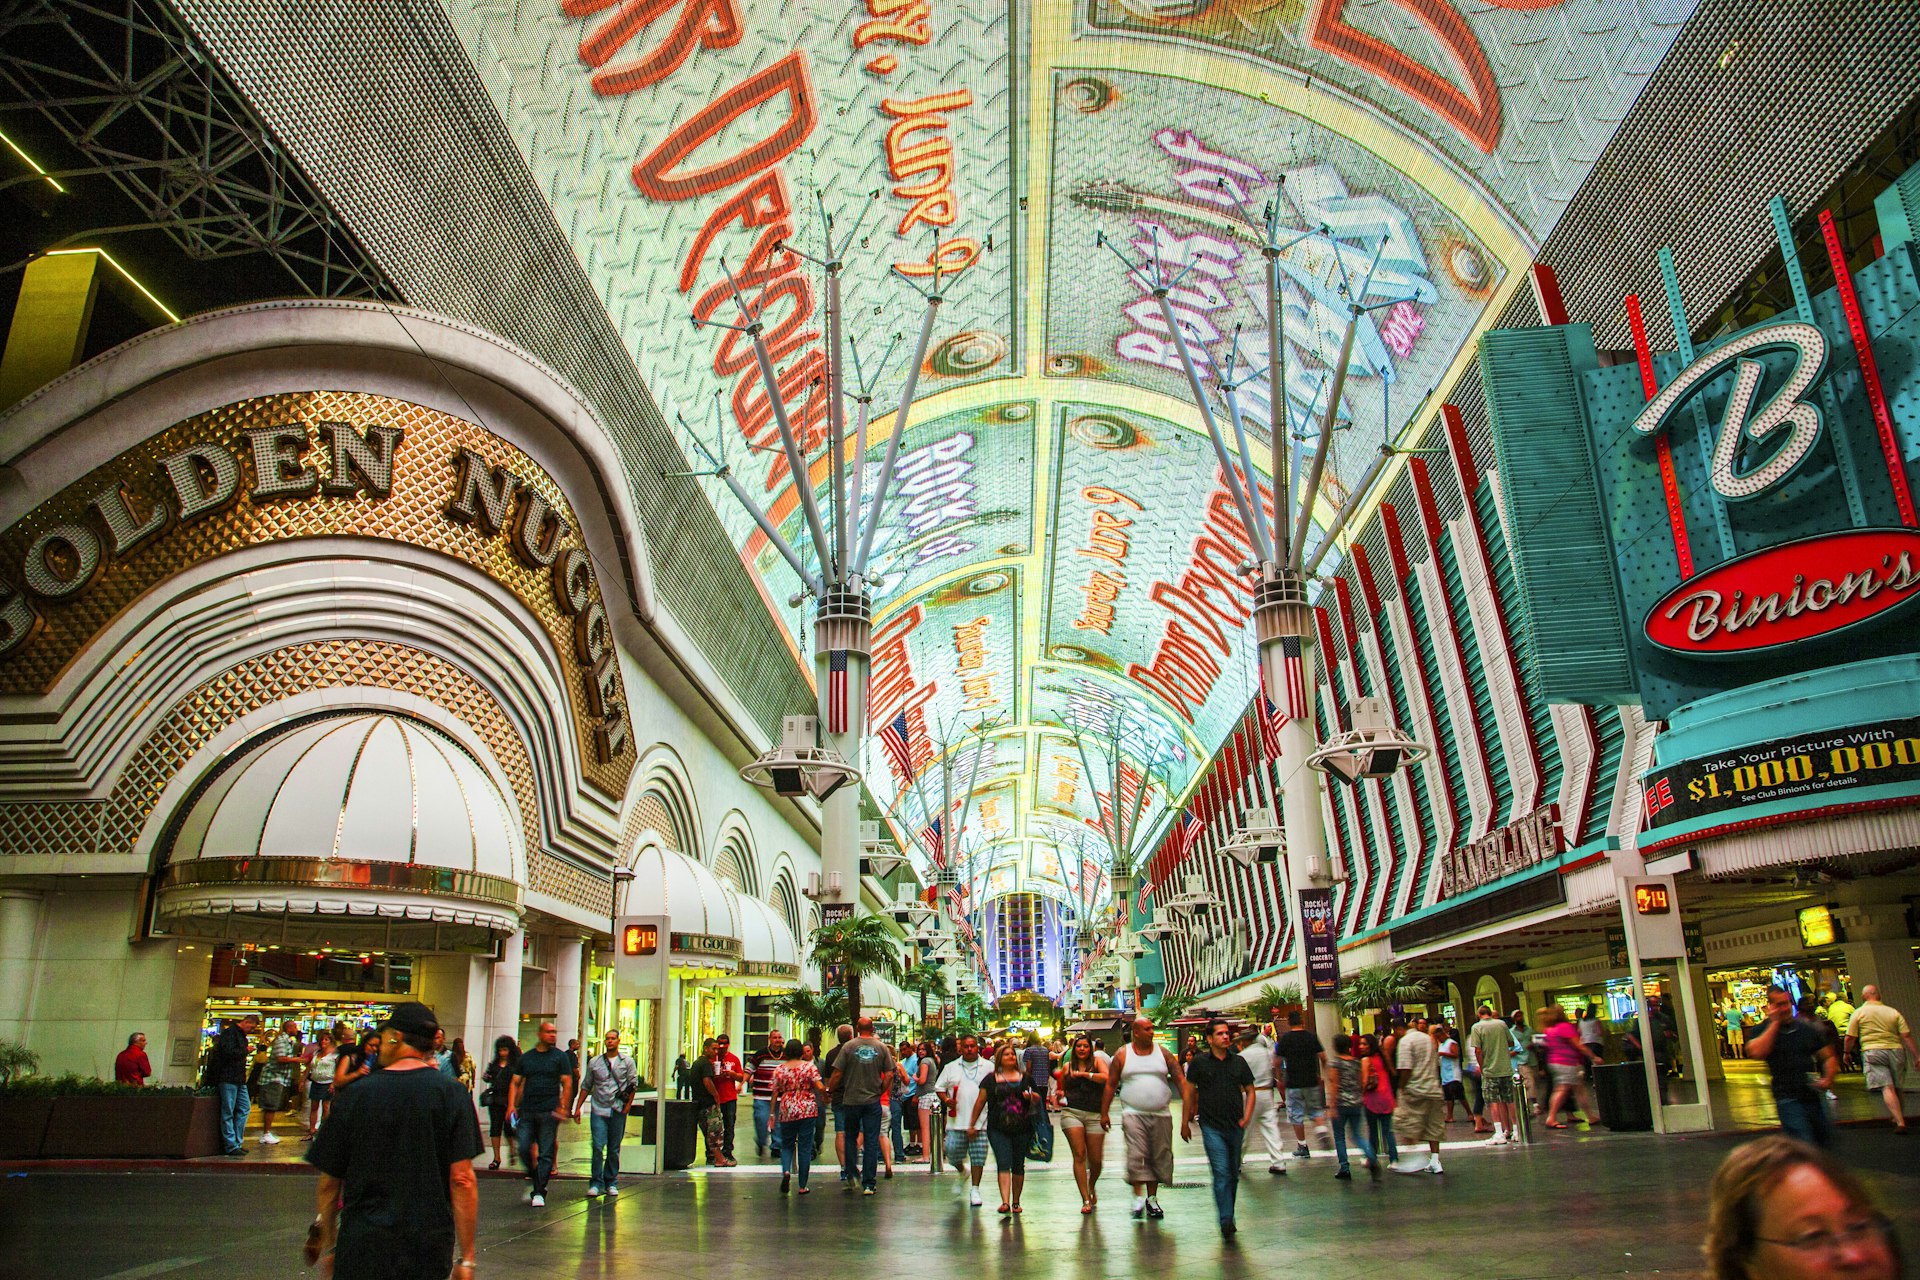 A wide shot of the people and casinos on Fremont St